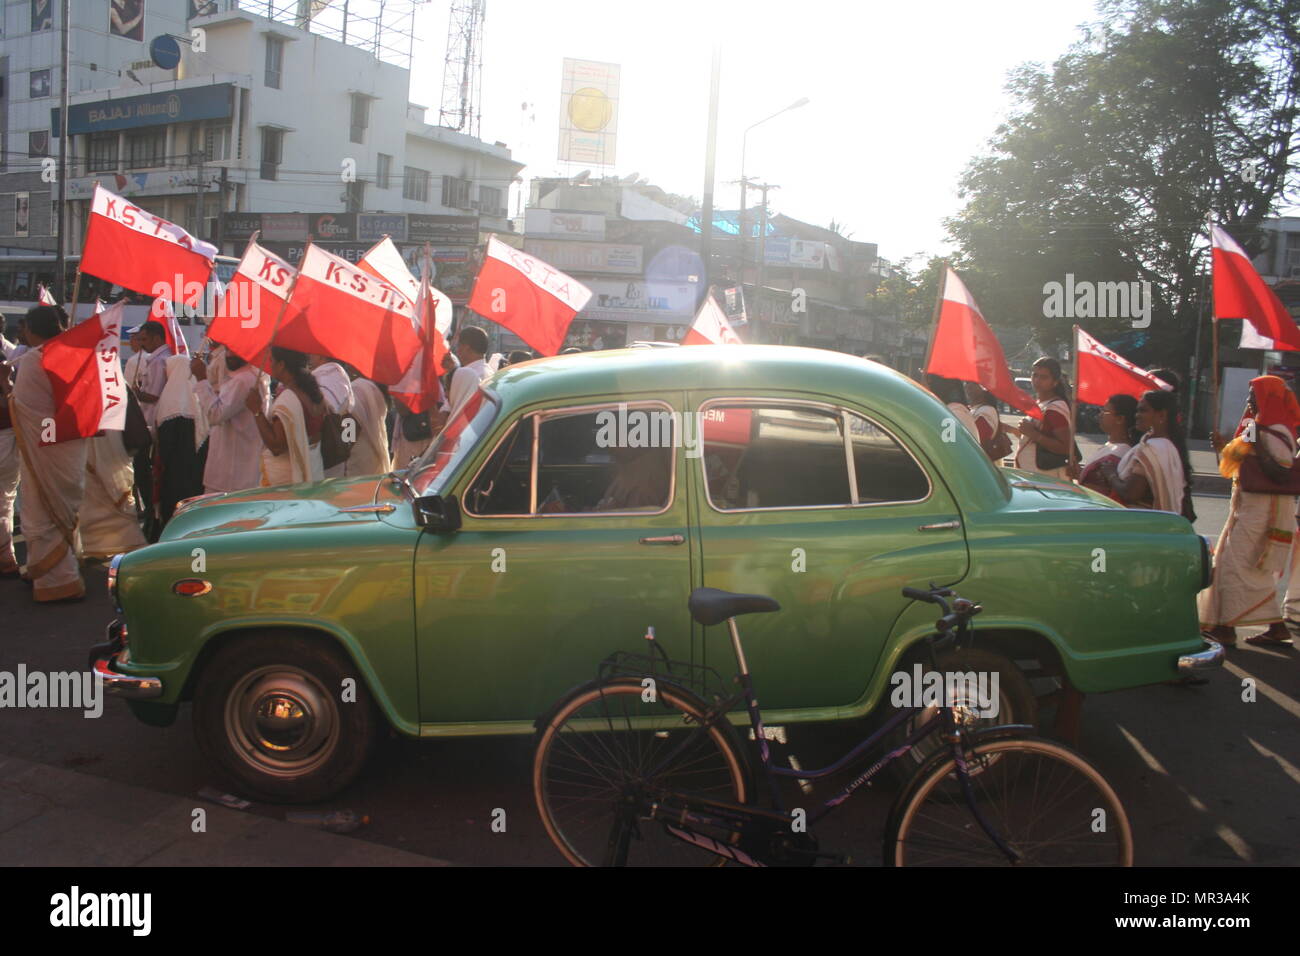 Protesters with Flags and Green Ambassador Car, Trivandrum, India Stock Photo